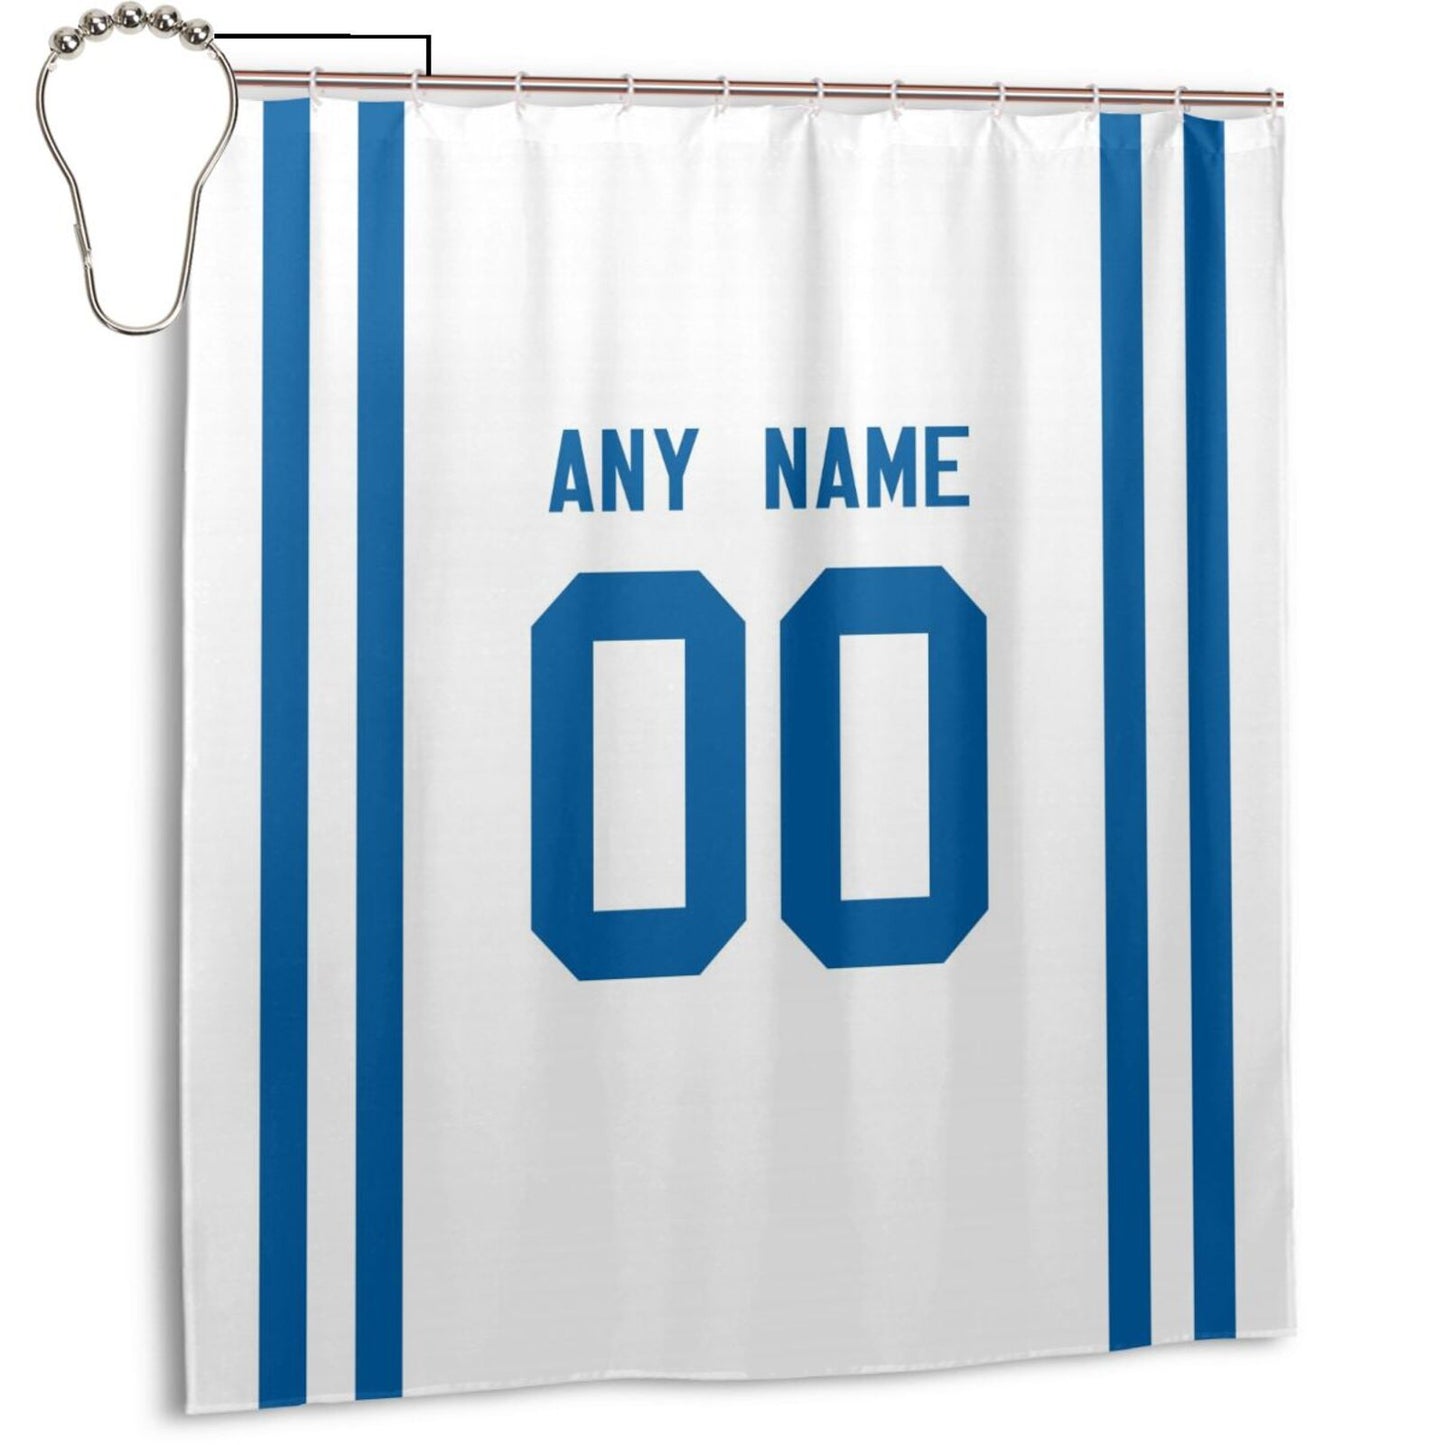 Custom Football Indianapolis Colts style personalized shower curtain custom design name and number set of 12 shower curtain hooks Rings